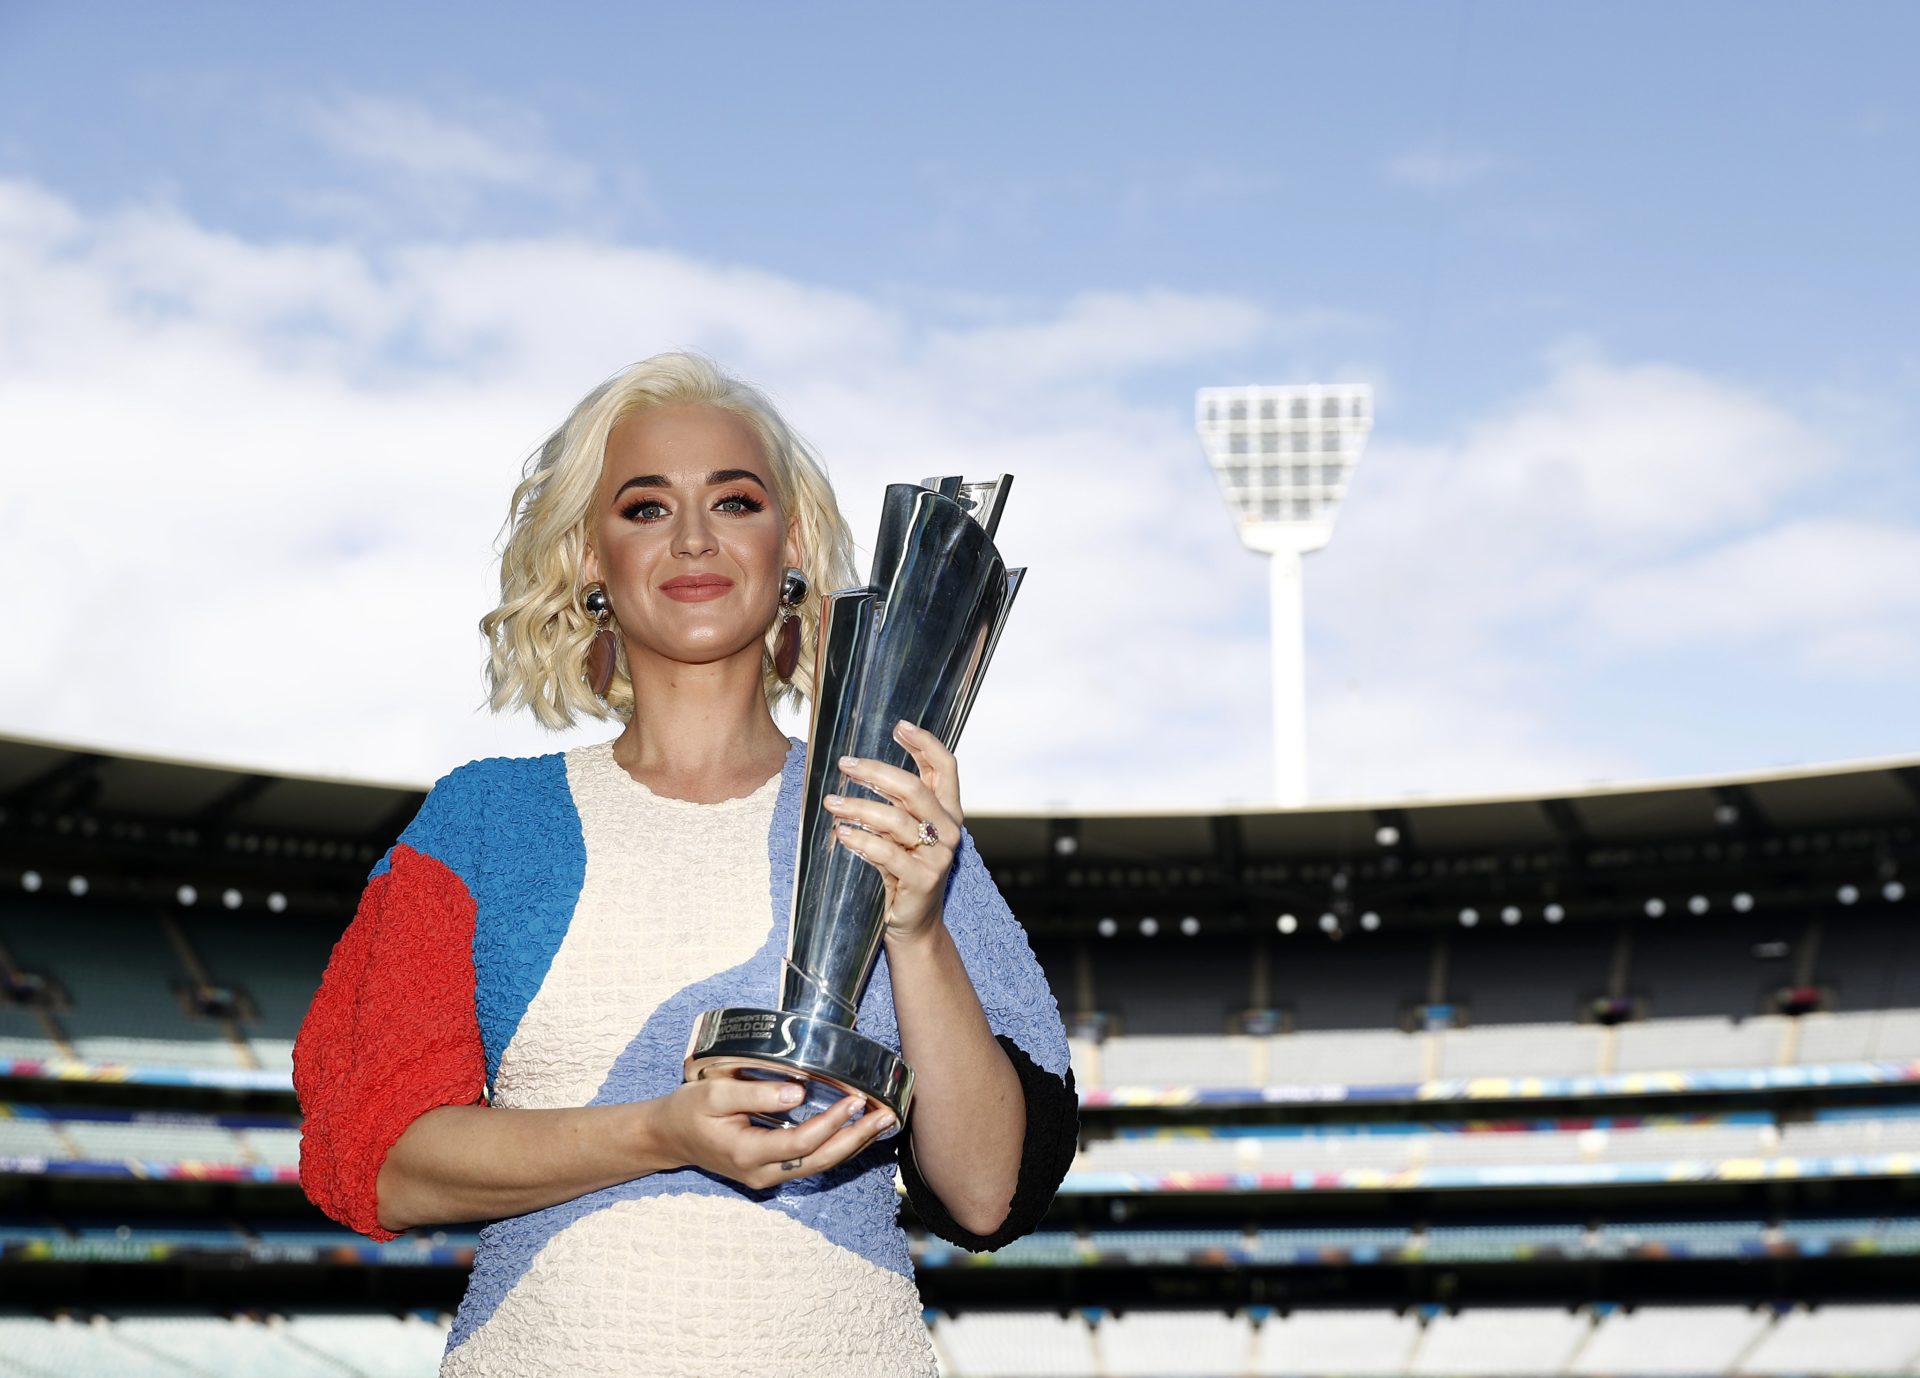 Katy-Perry-holds-the-trophy-1920x1378.jp